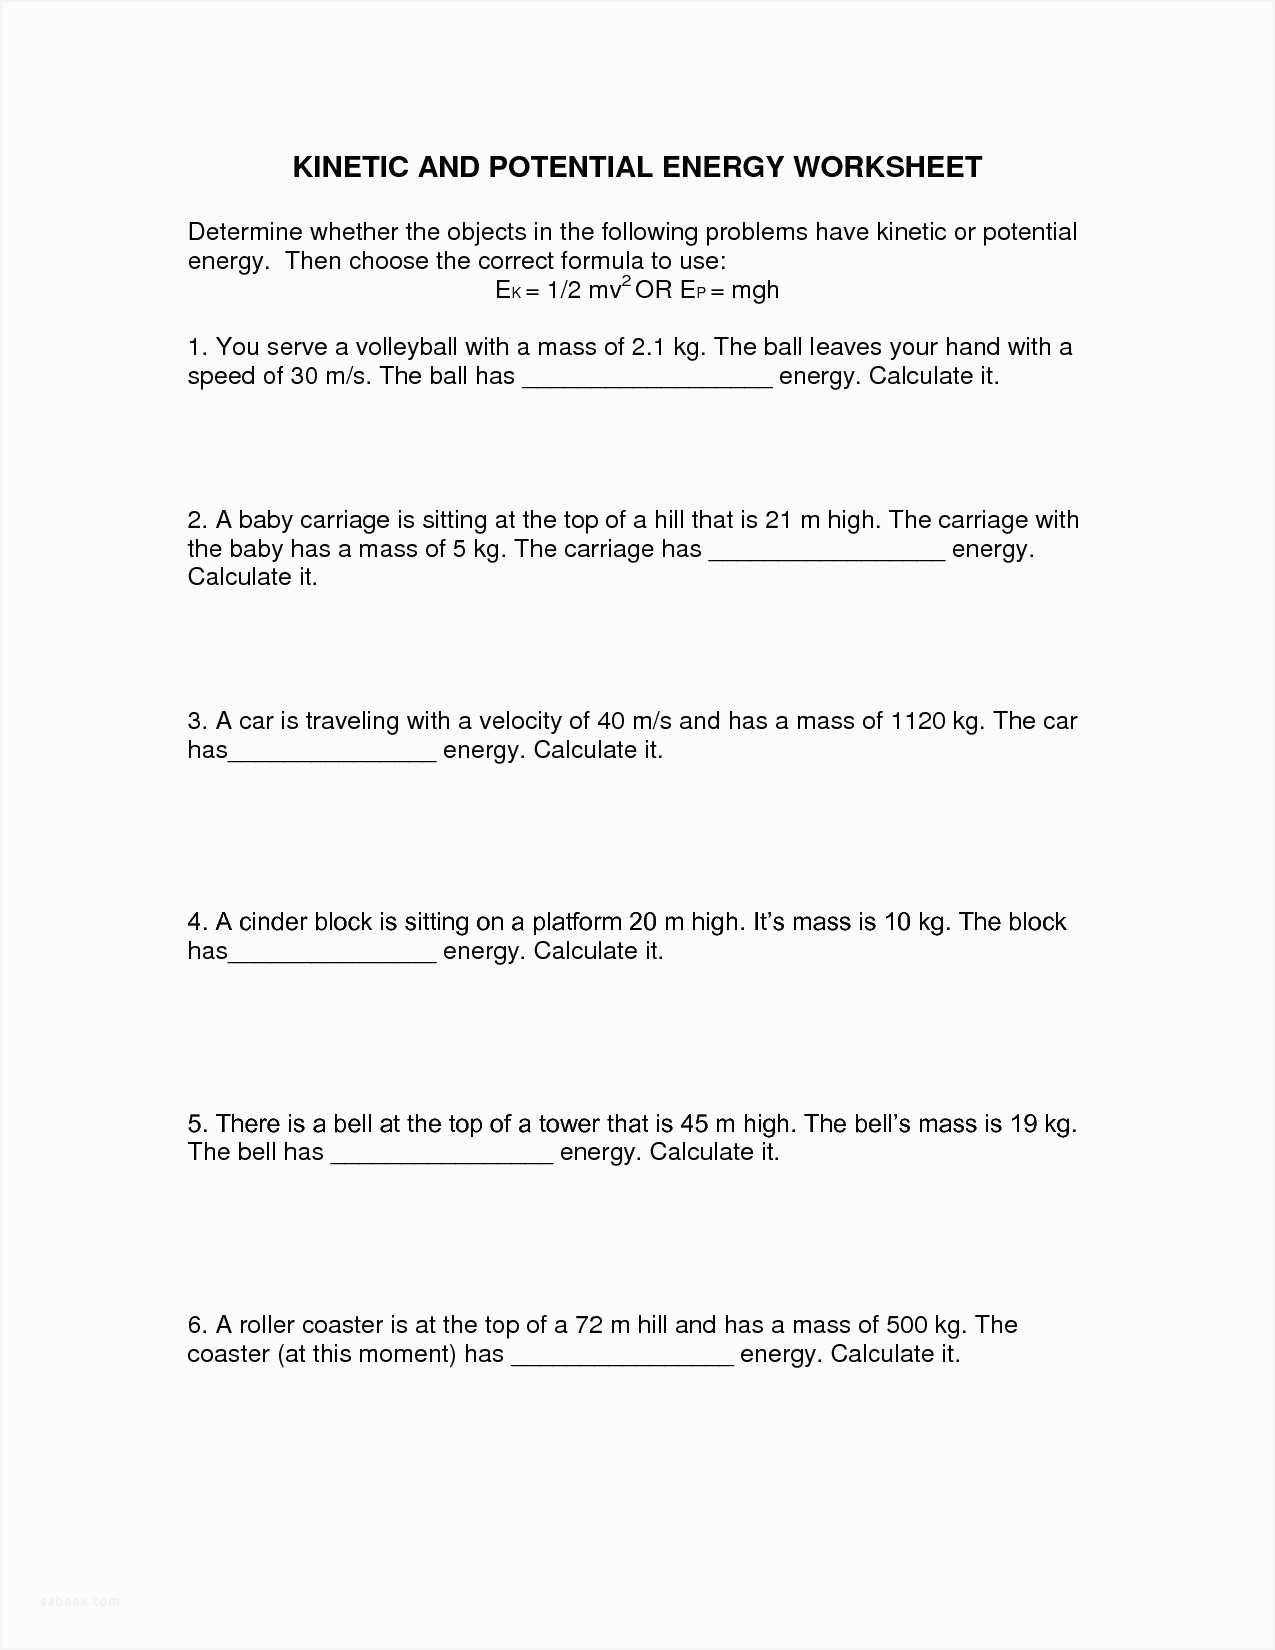 Potential Energy Problems Worksheet Along with Kinetic and Potential Energy Worksheet Middle School Breadandhearth